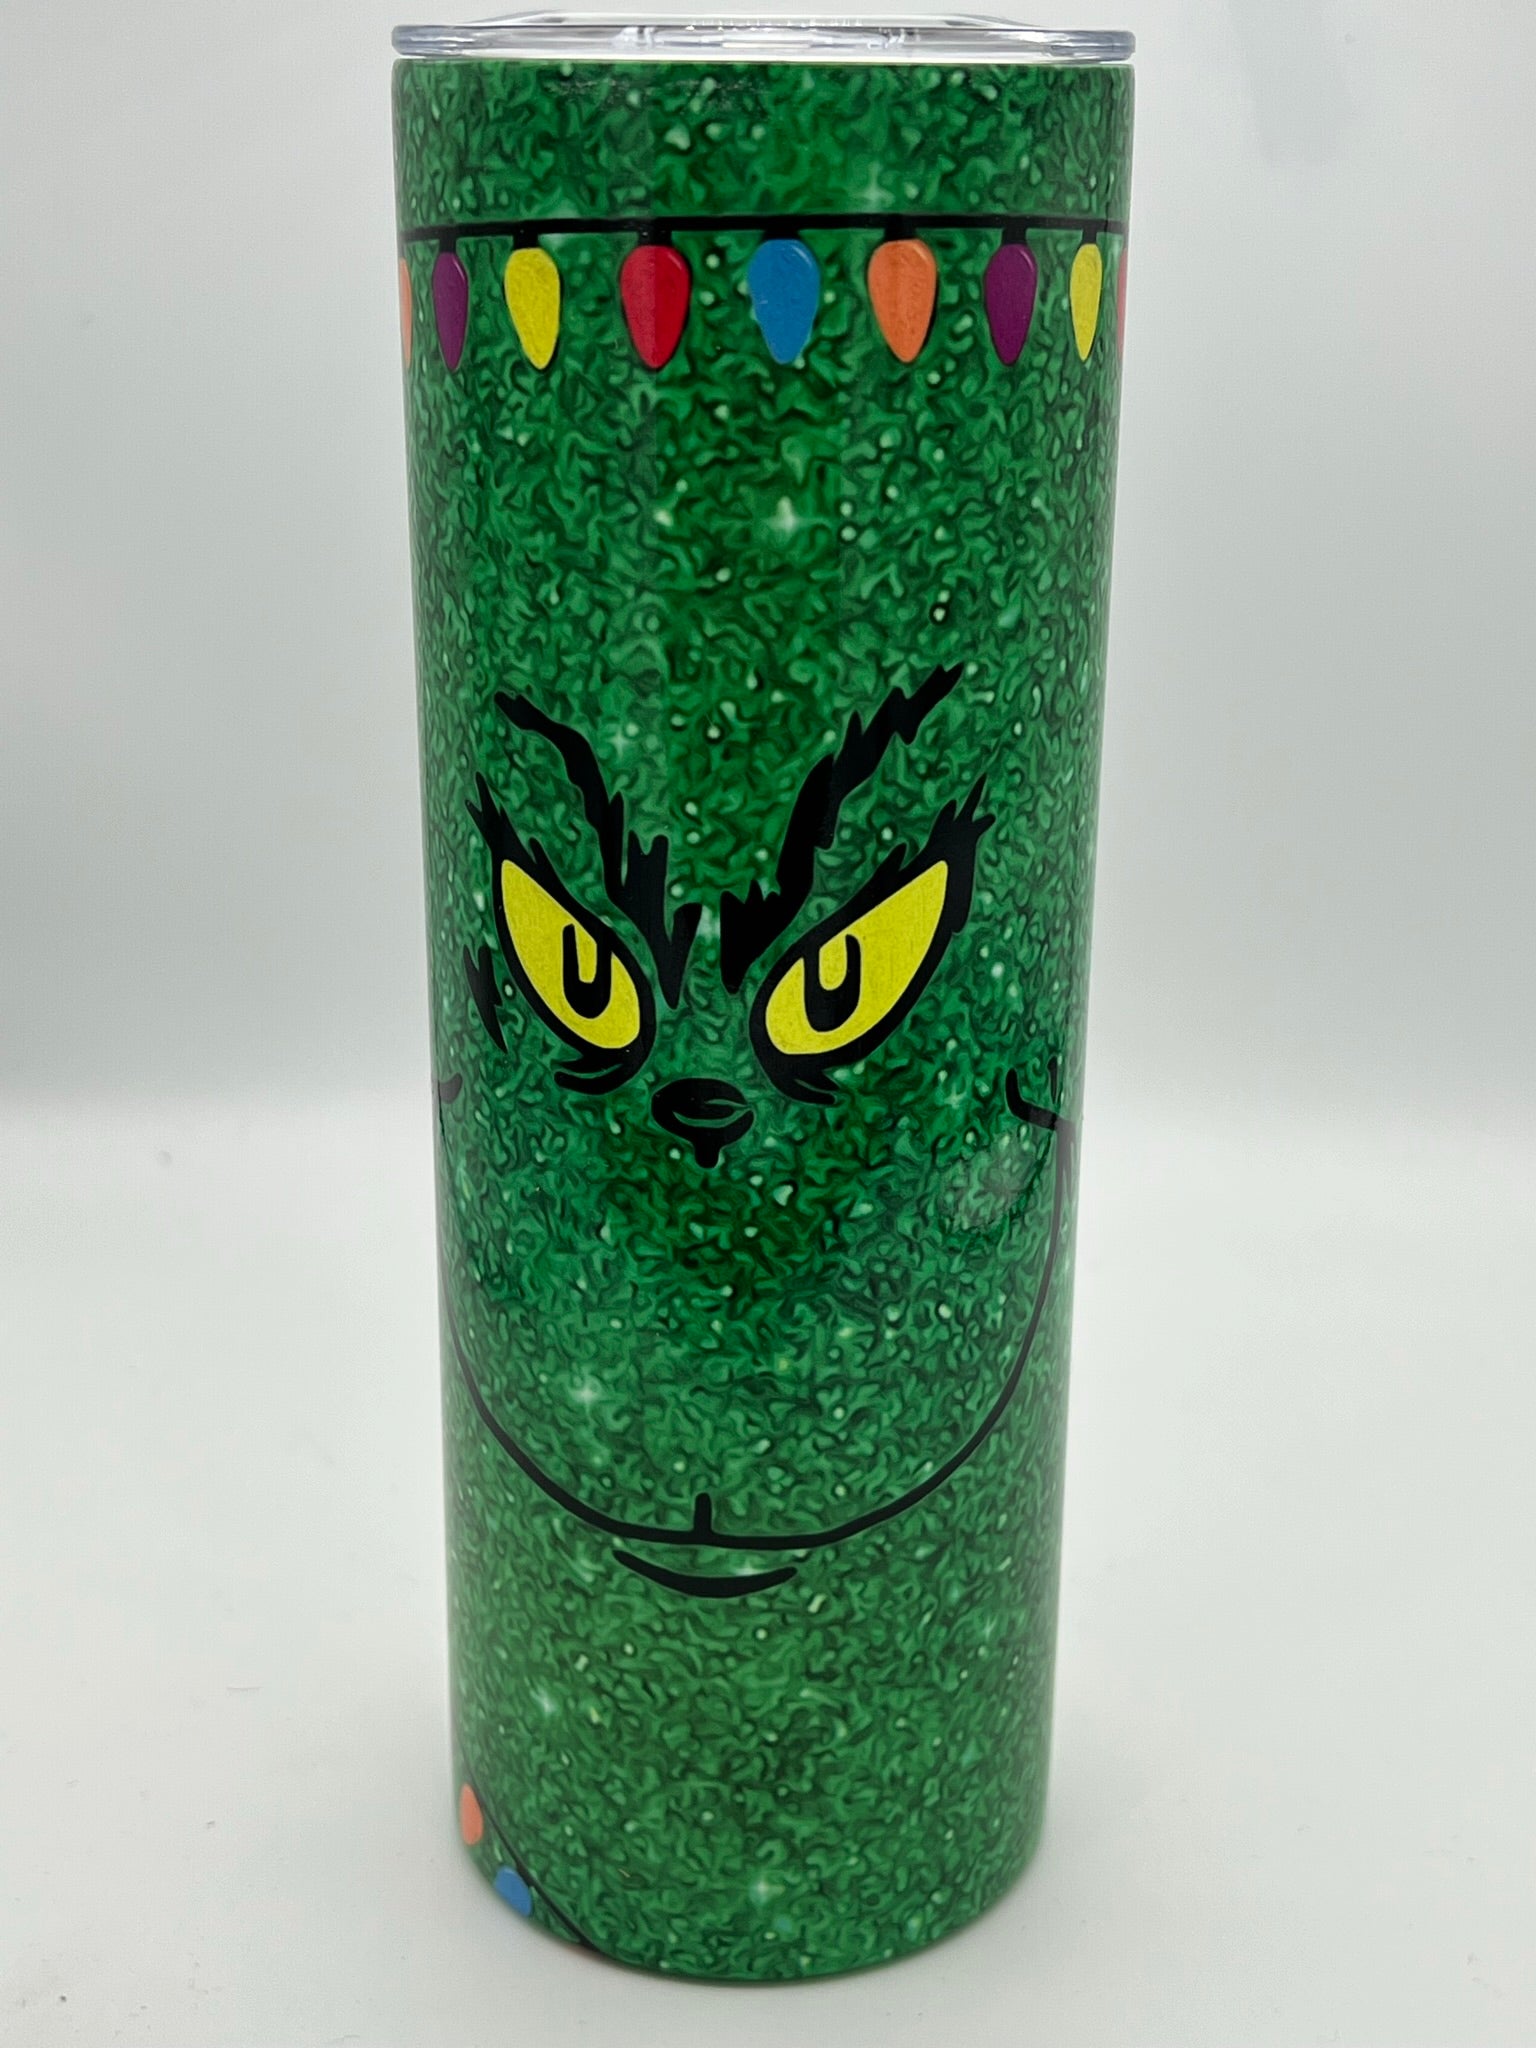 Hey Grinch Fans! This 30oz Holiday Grinch Glitter Tumbler is double in